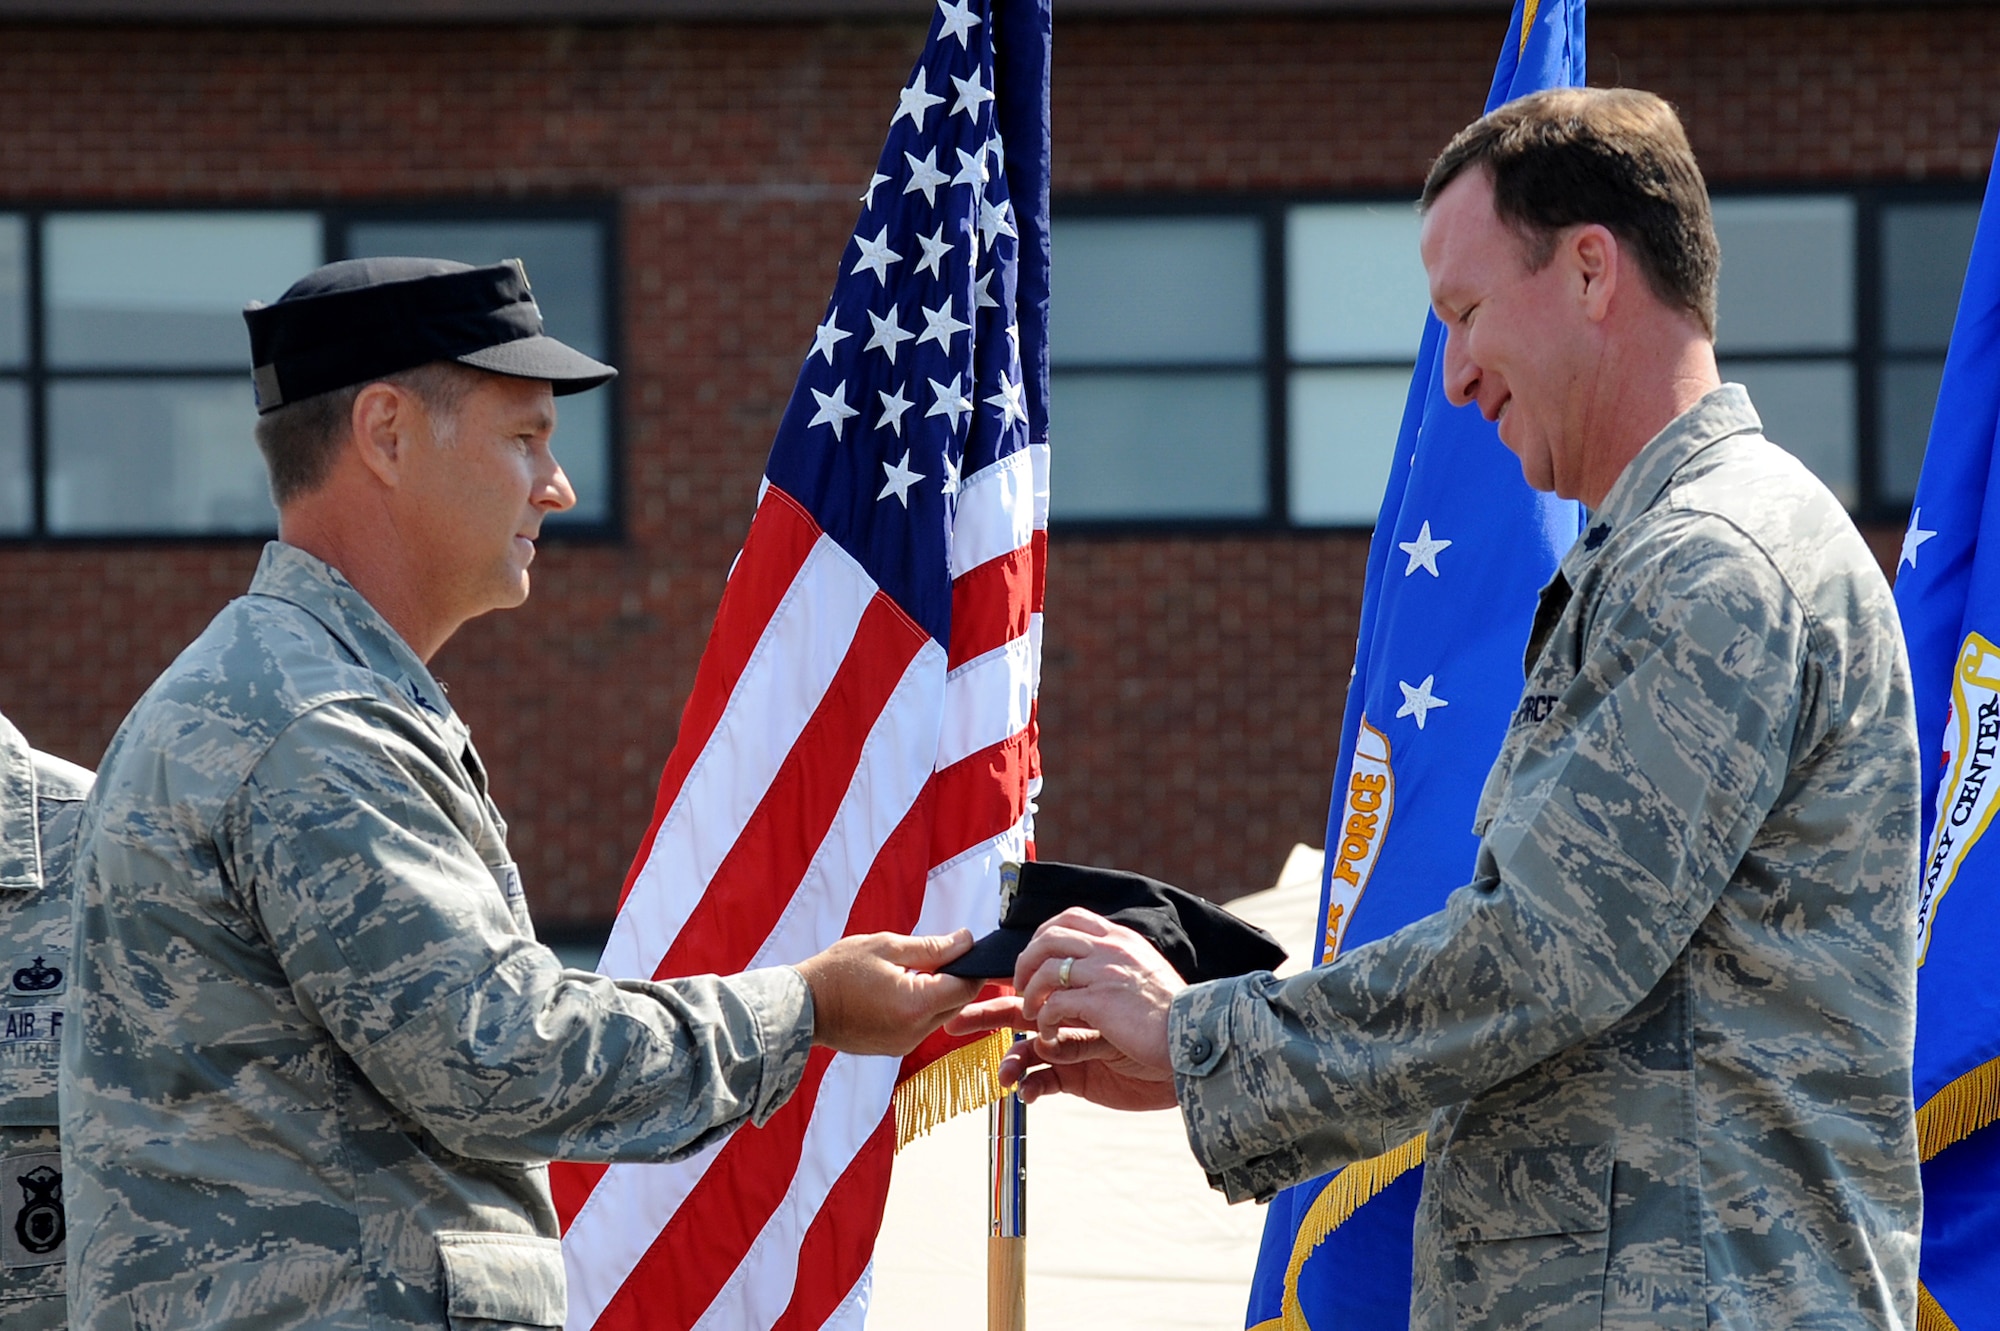 Col. Mark Ellis, Expeditionary Operations School commandant, presents the 421st Combat Training Squadron 'black-hat' to Lt. Col. David Lenderman July 13 during a change of command ceremony at Joint Base McGuire-Dix-Lakehurst, N.J.  Lt. Col. Mitchell Monroe relinquished command of the 421st CTS housed at the U.S. Air Force Expeditionary Center on Fort Dix. (U.S. Air Force Photo/Staff Sgt. Nathan G. Bevier) 